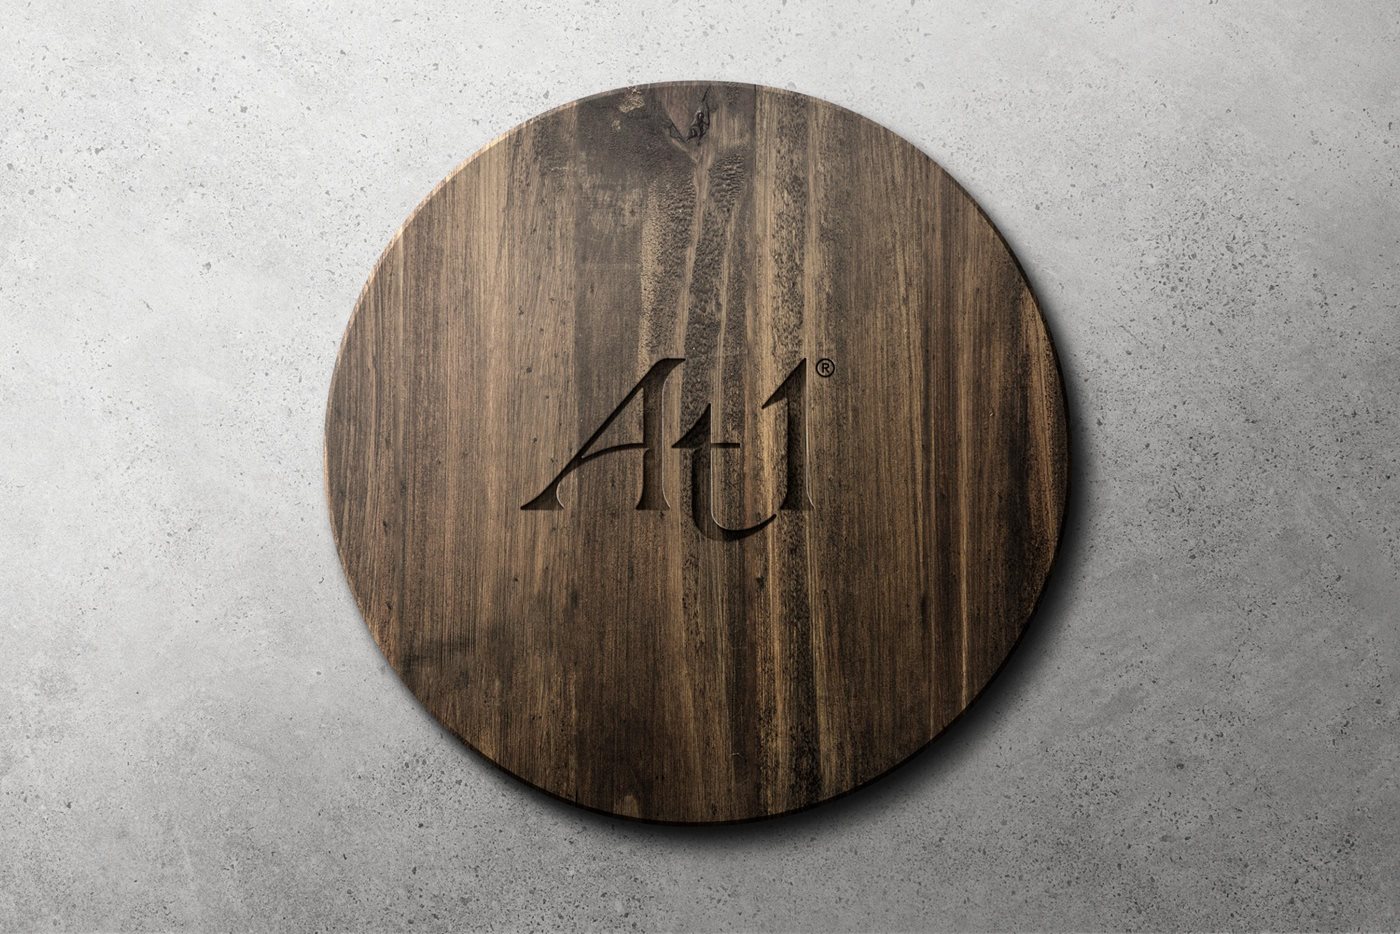 At1 logo etched in to a dark wooden disc aganst a concrete background